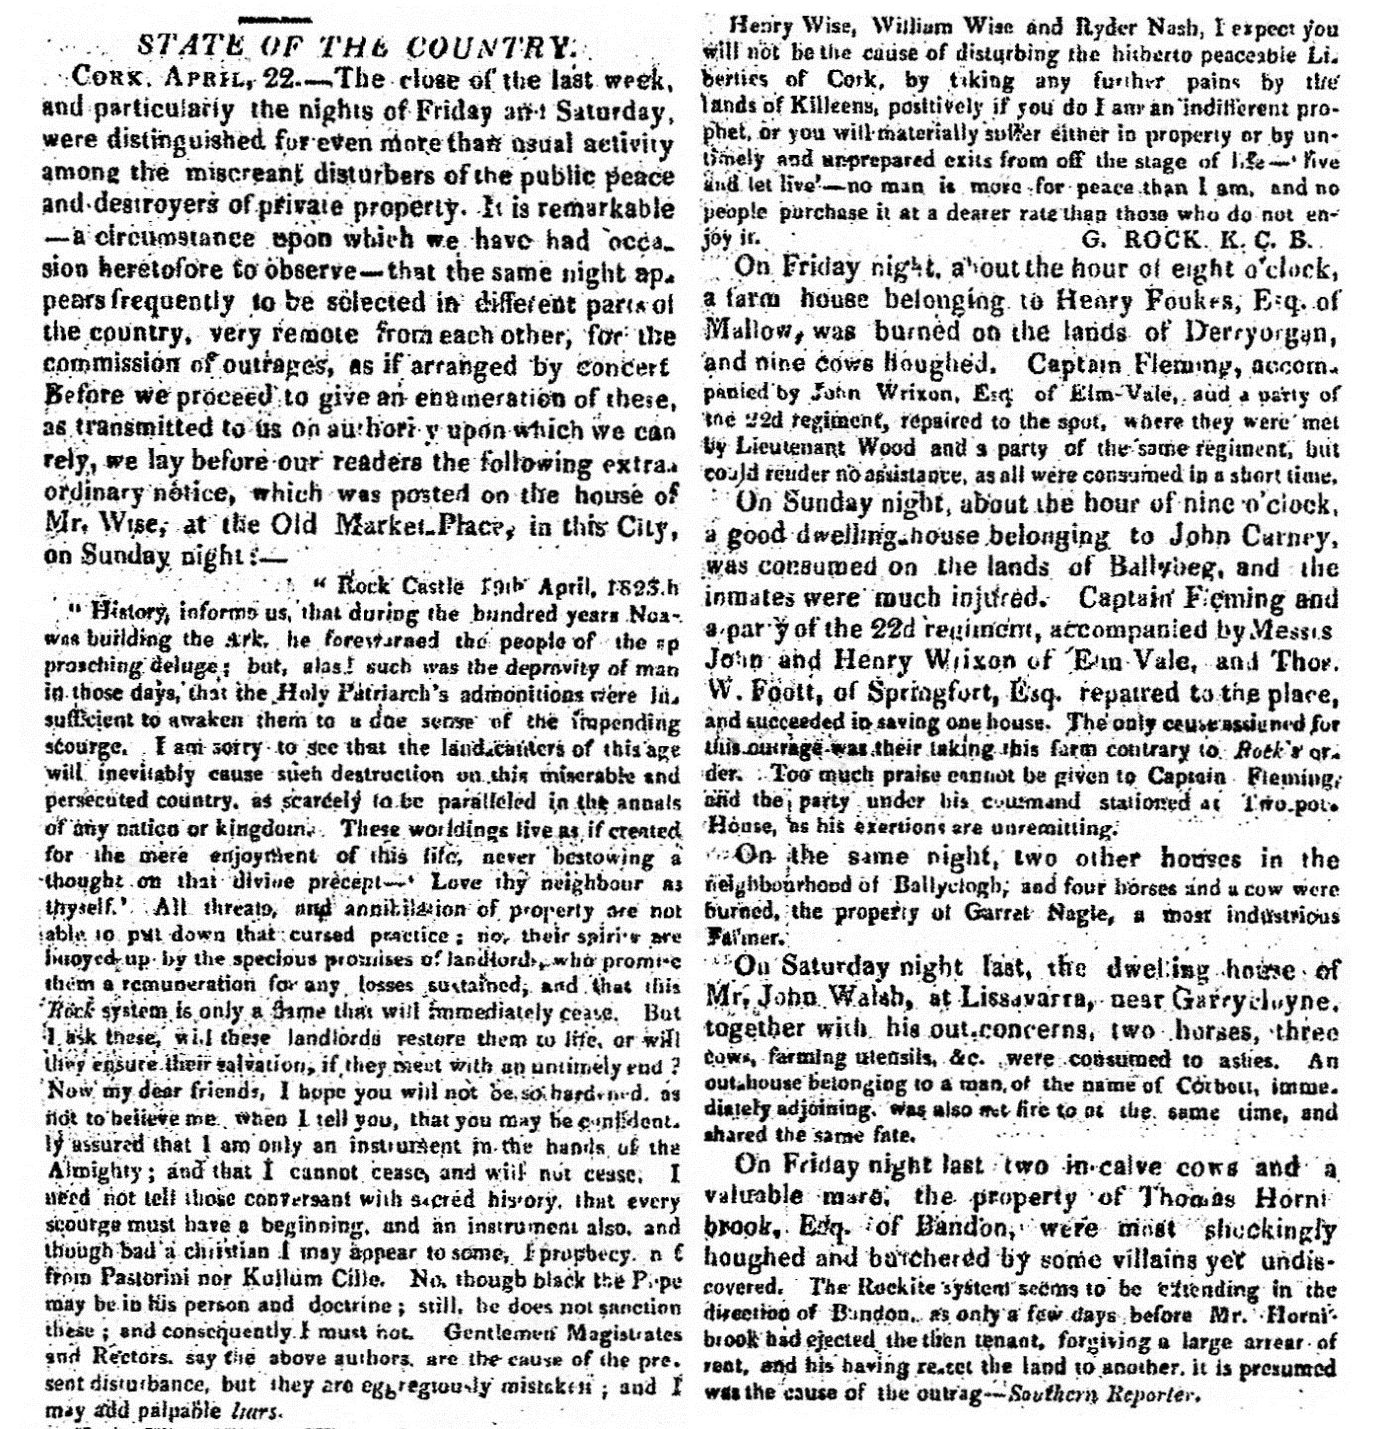 C:\Users\Virginia Rundle\Dropbox\VR\Ancestry Stuff\Rowan to unbuckle PDF's\Publication Freemans Journal 25 APR 1823 State-of-the-Country.png